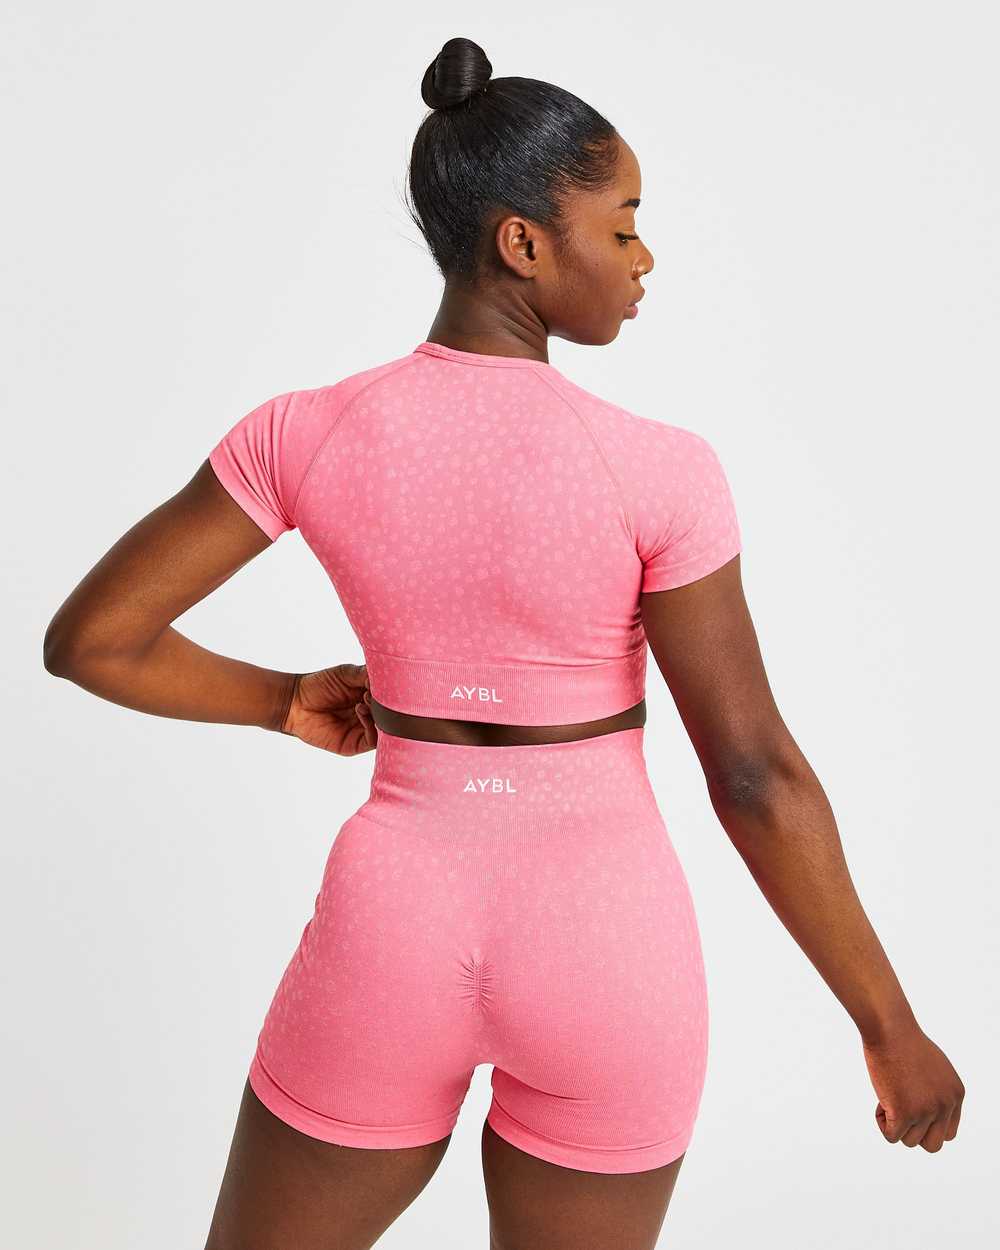 AYBL Evolve Speckle Seamless Crop Top - Coral Pink - image 2